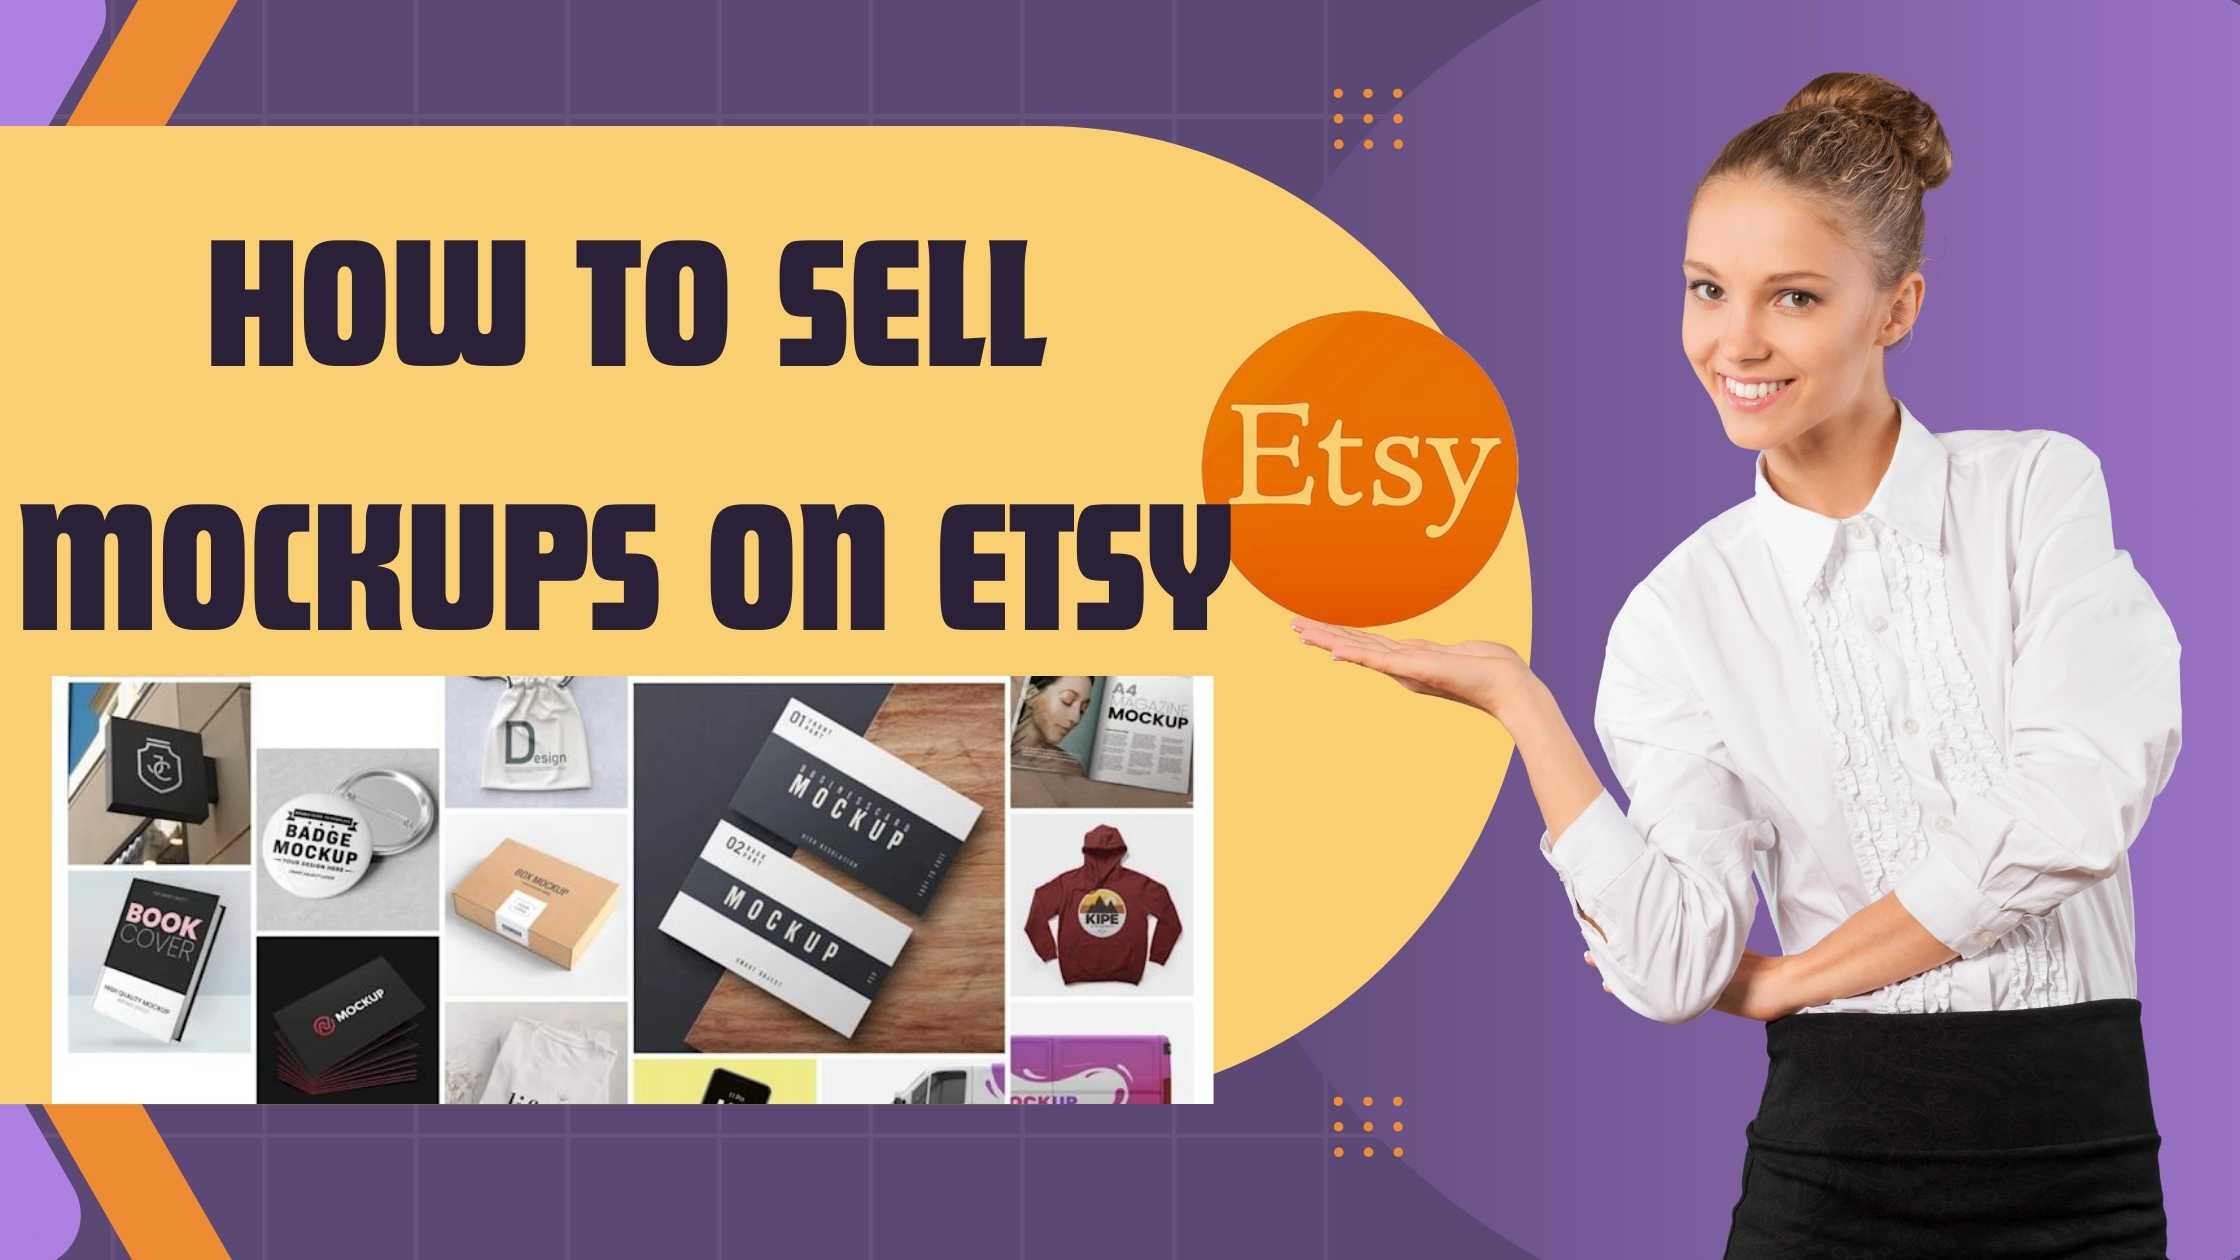 How to Sell Mockups on Etsy